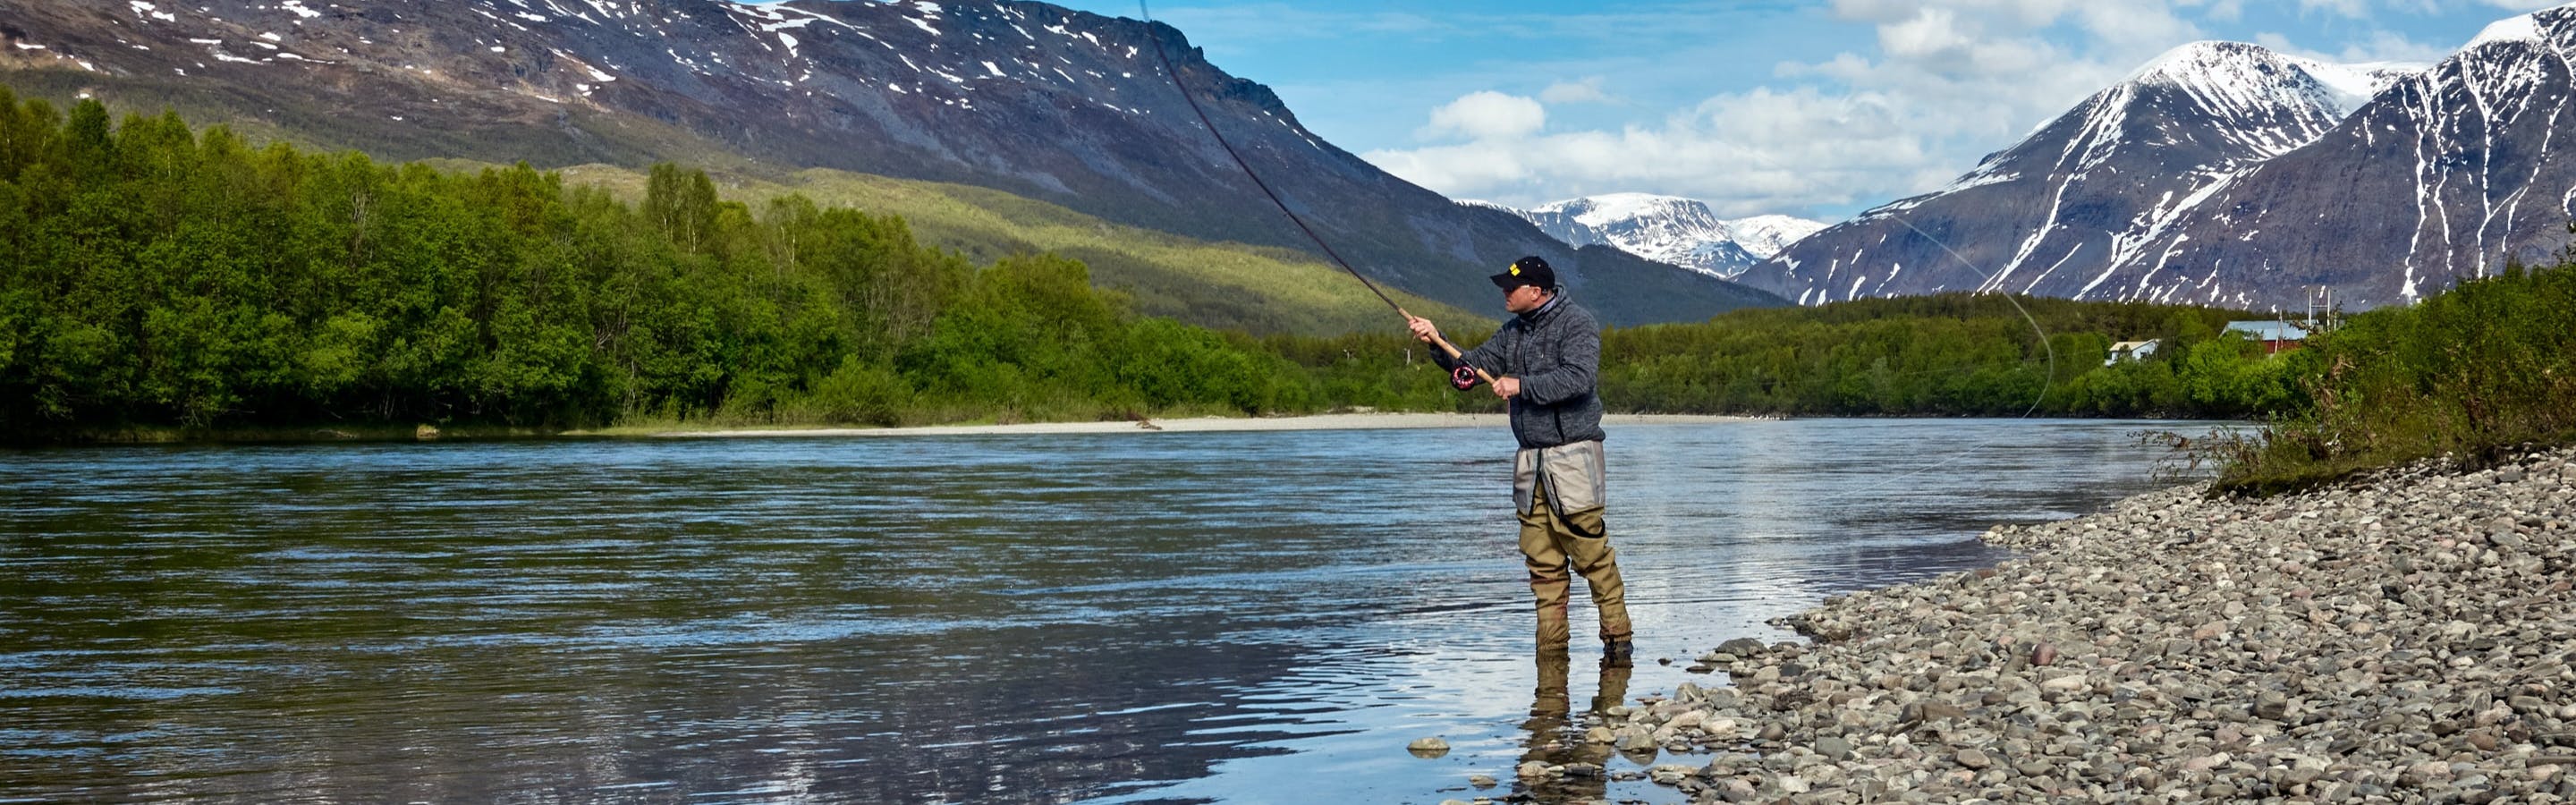 A fly fisherman standing in the river near the bank casting out a fly with snow-topped mountains in the distance